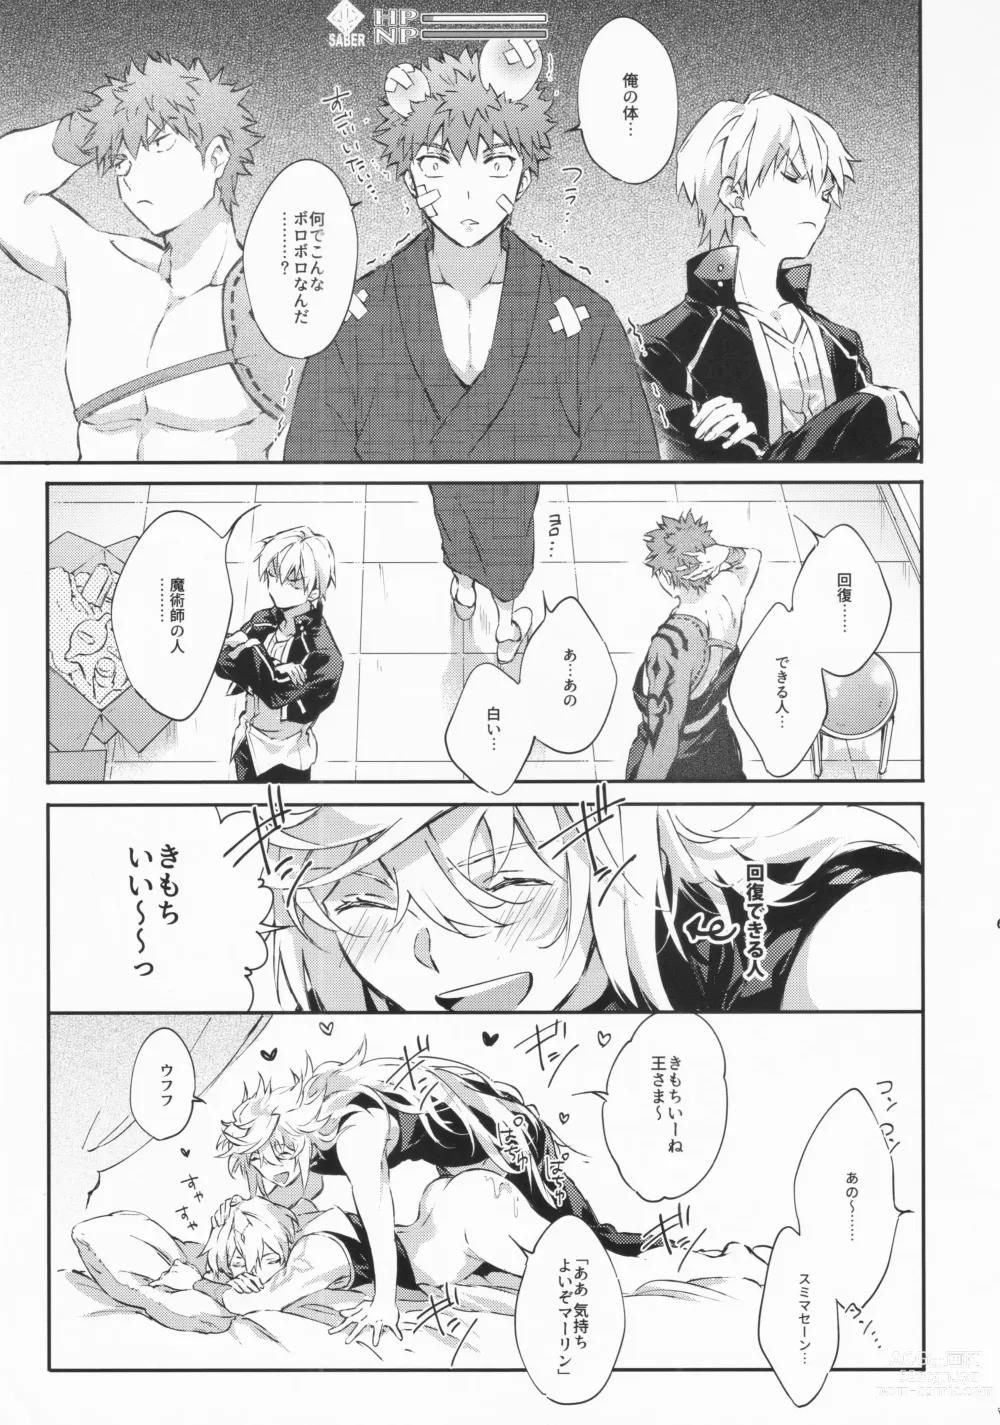 Page 56 of doujinshi STARDUST LOVESONG encore special story 1st After 7 Days